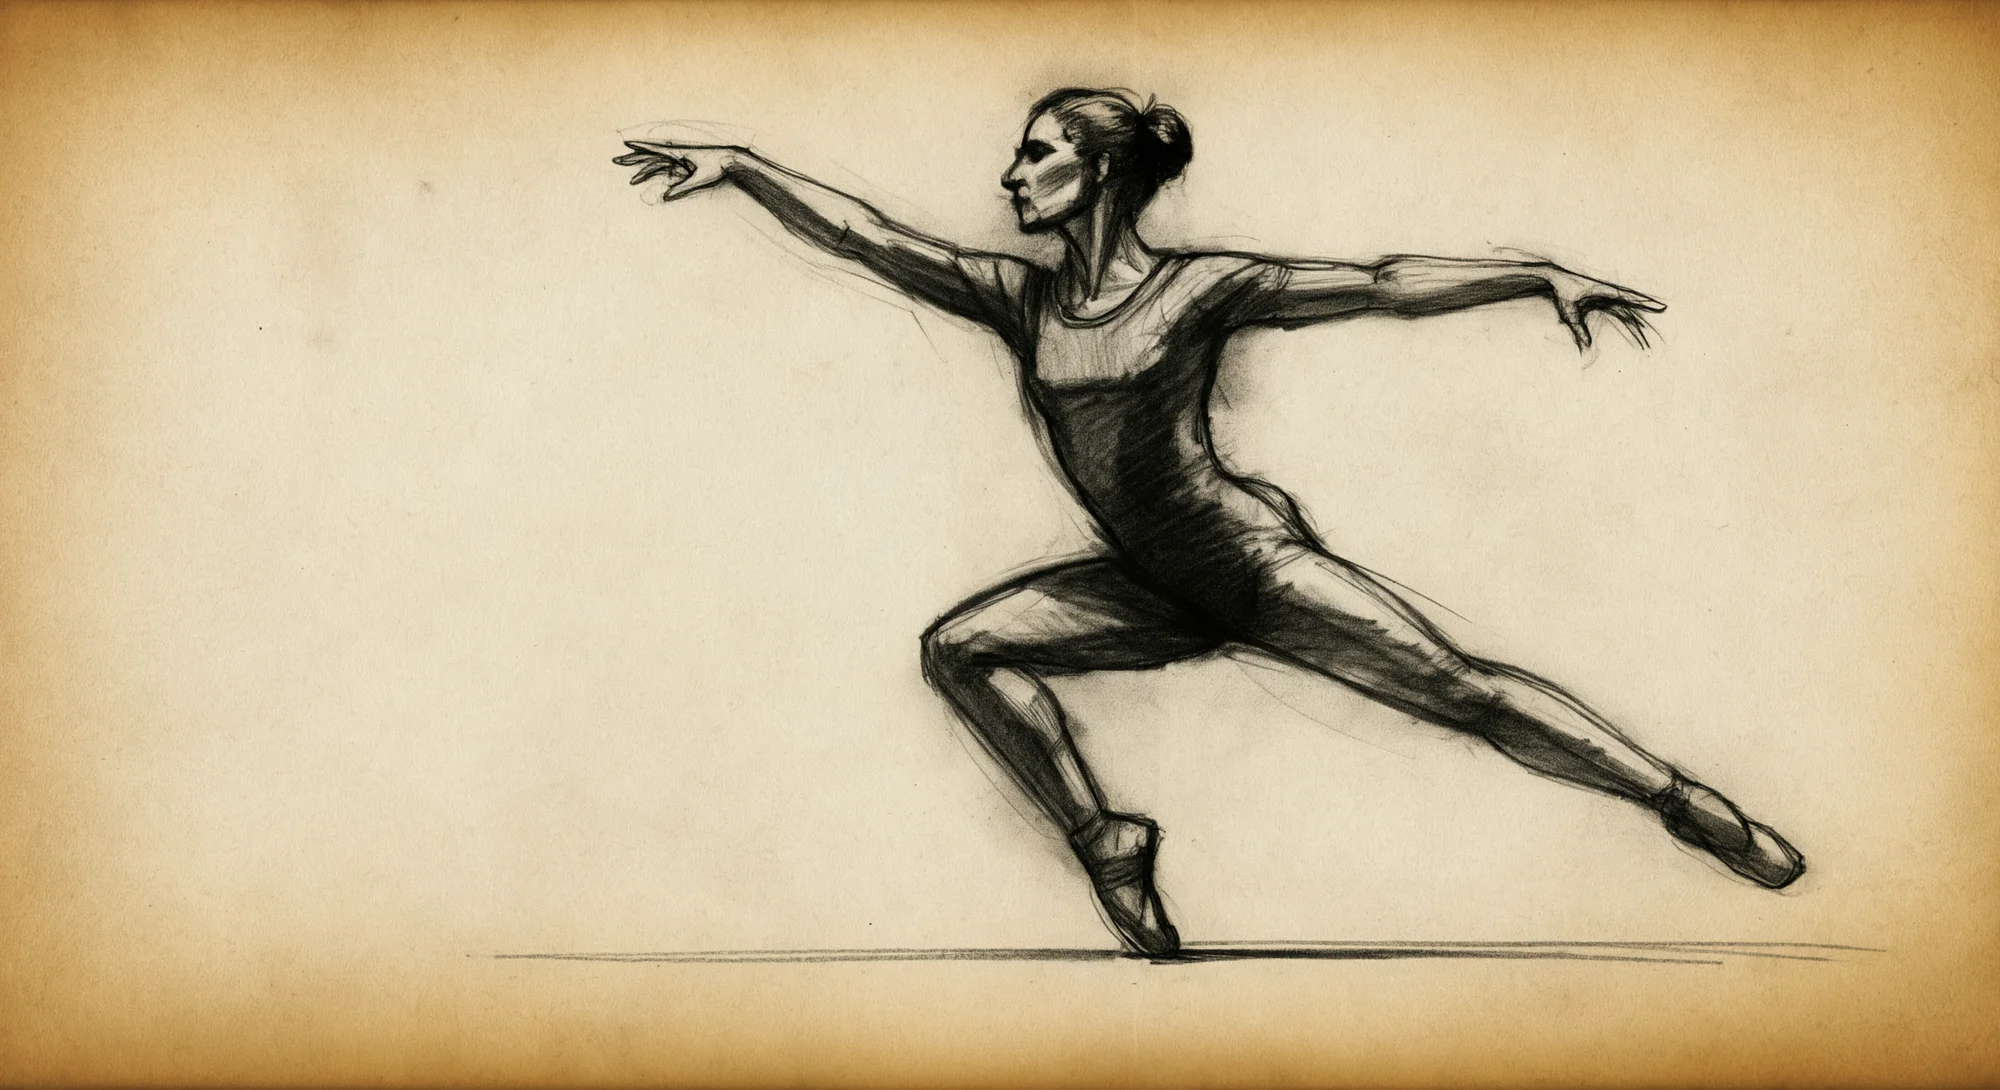 An abstract sketch: A blur of expressive lines and energy captures the dynamic movement of a dancer in a gestural charcoal drawing. Sketch on aged parchment paper.